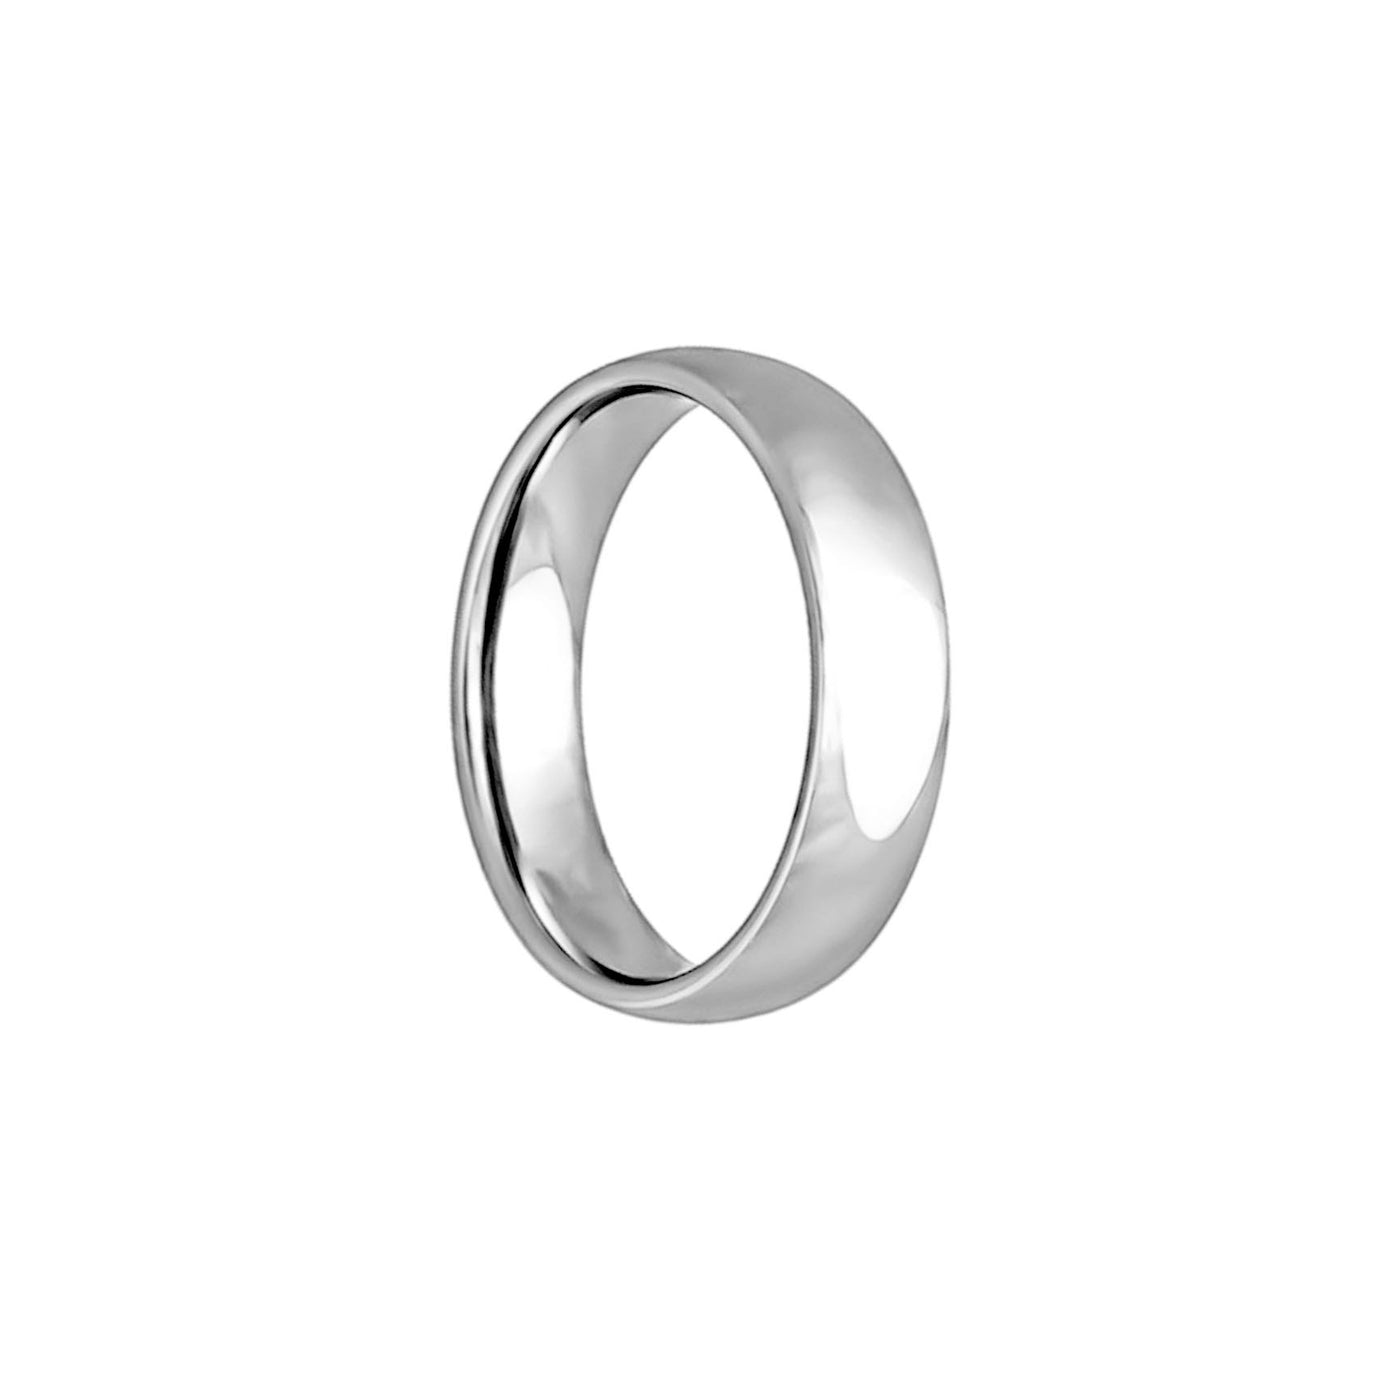 Shiny curved steel ring 6mm